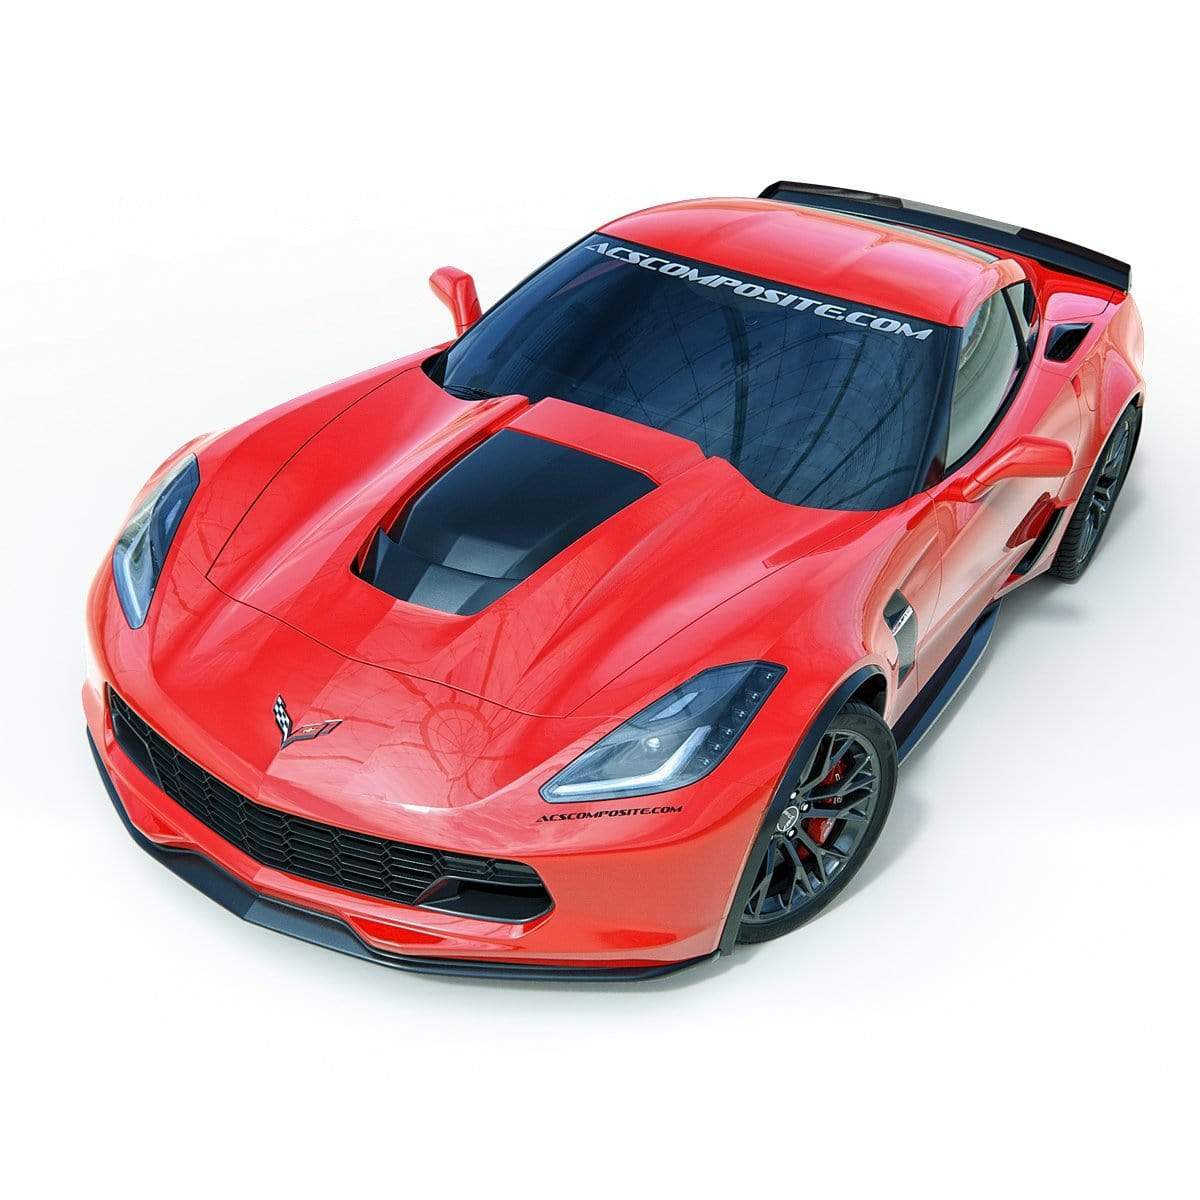 ACS Composite C7-ZR1 Hood for Corvette C7, SKU 45-4-203, with vented extractor system and improved cooling capacity.